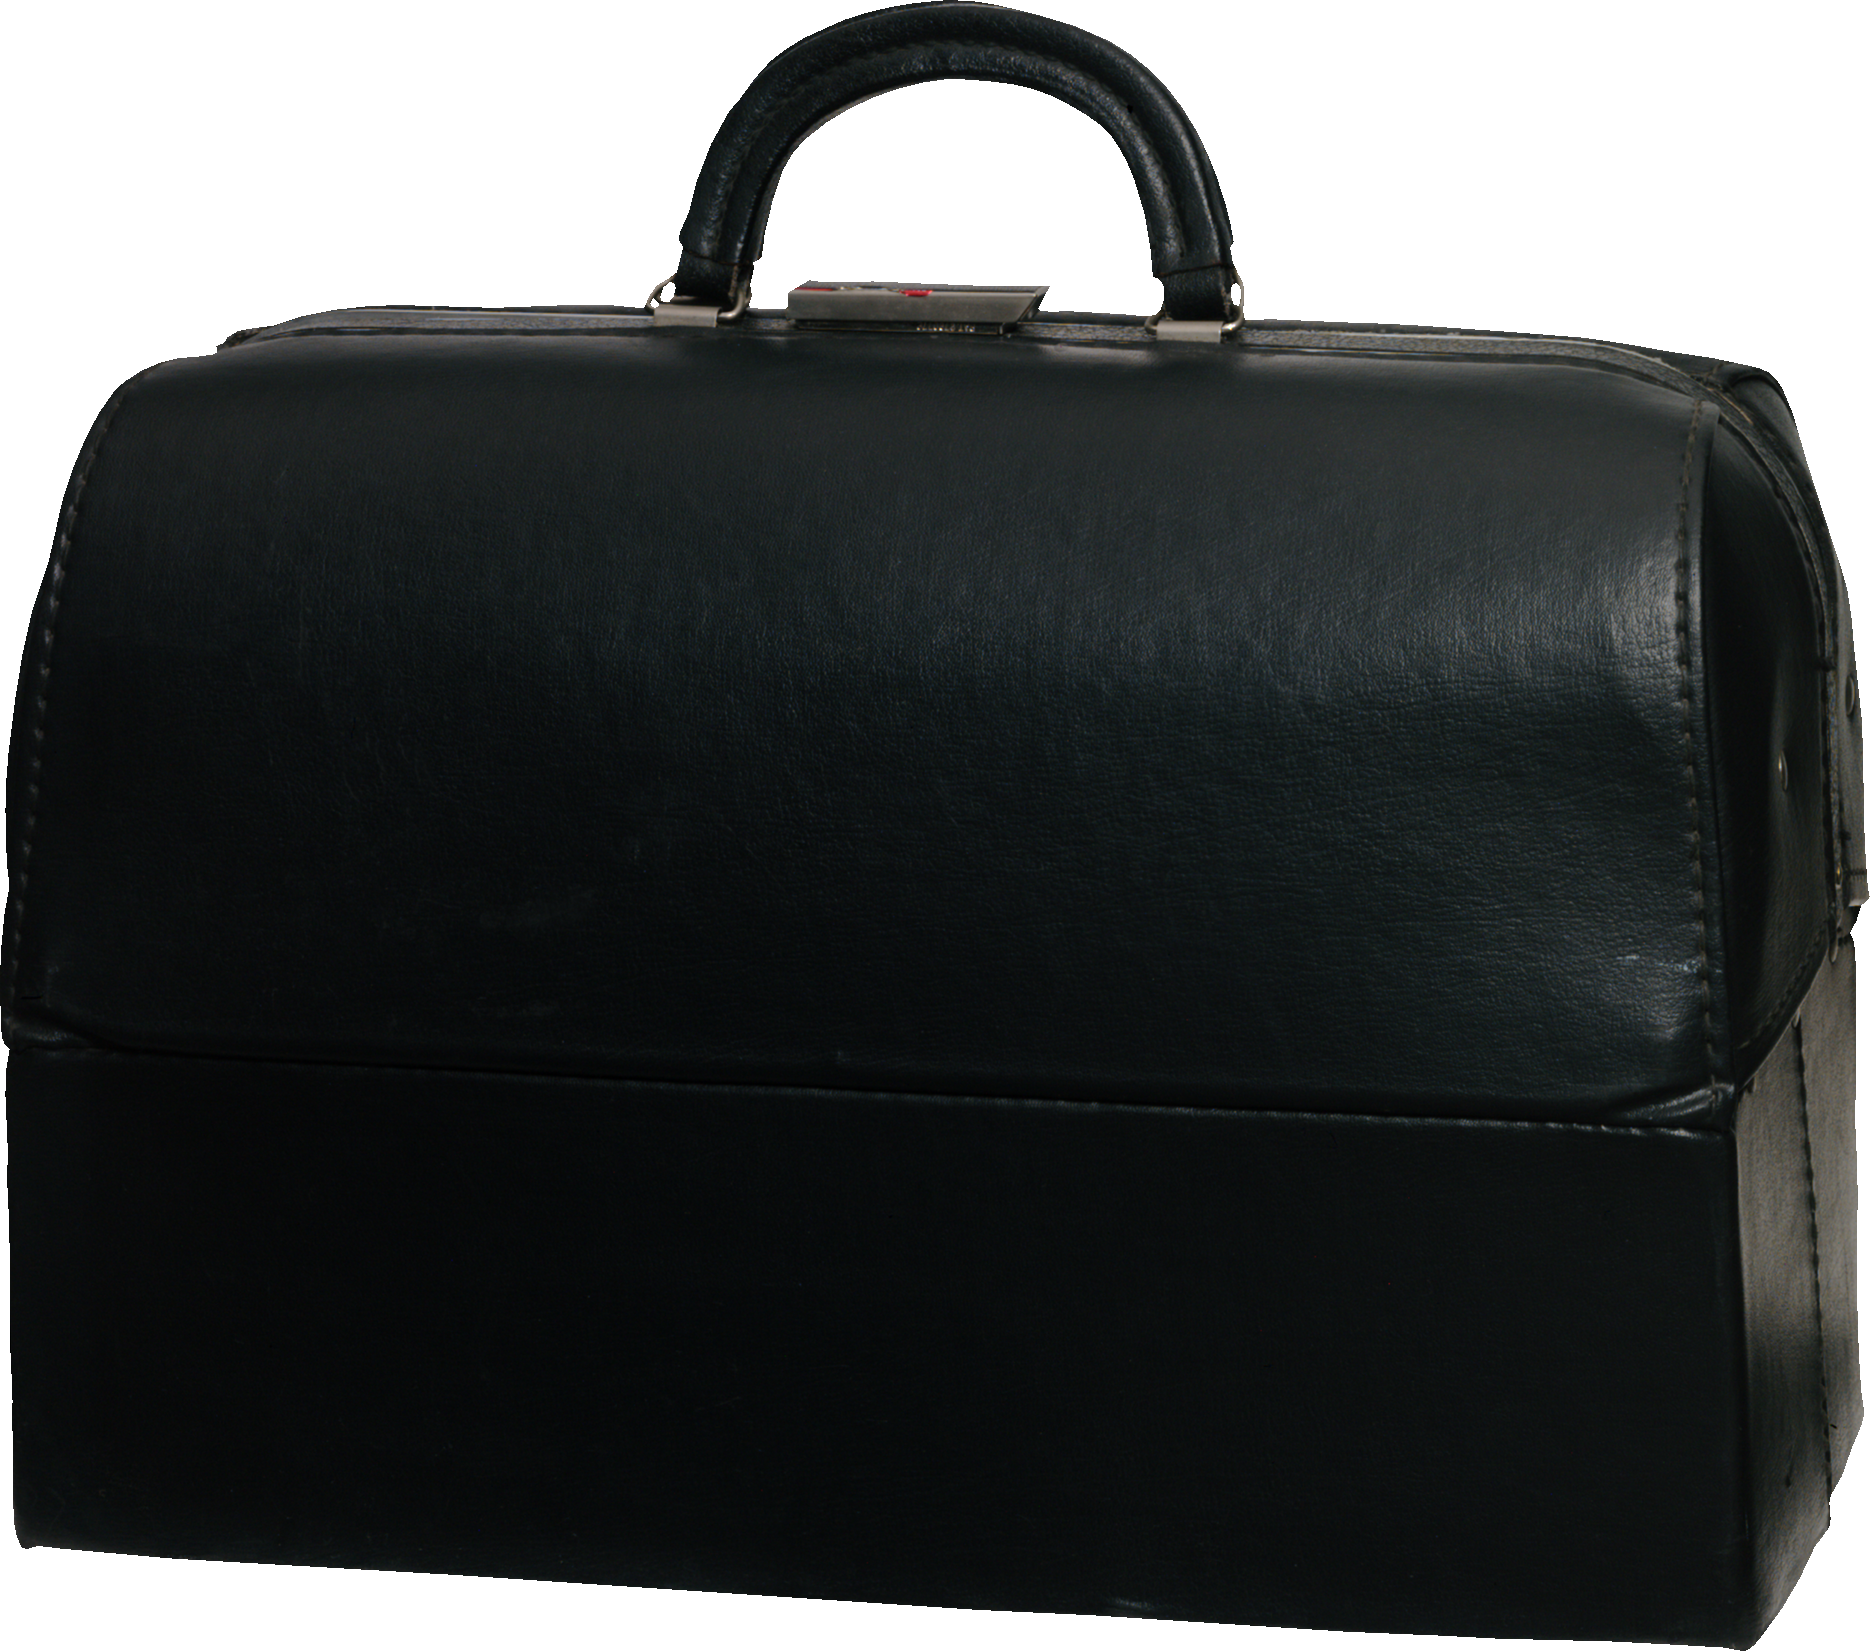 Suitcase PNG Image